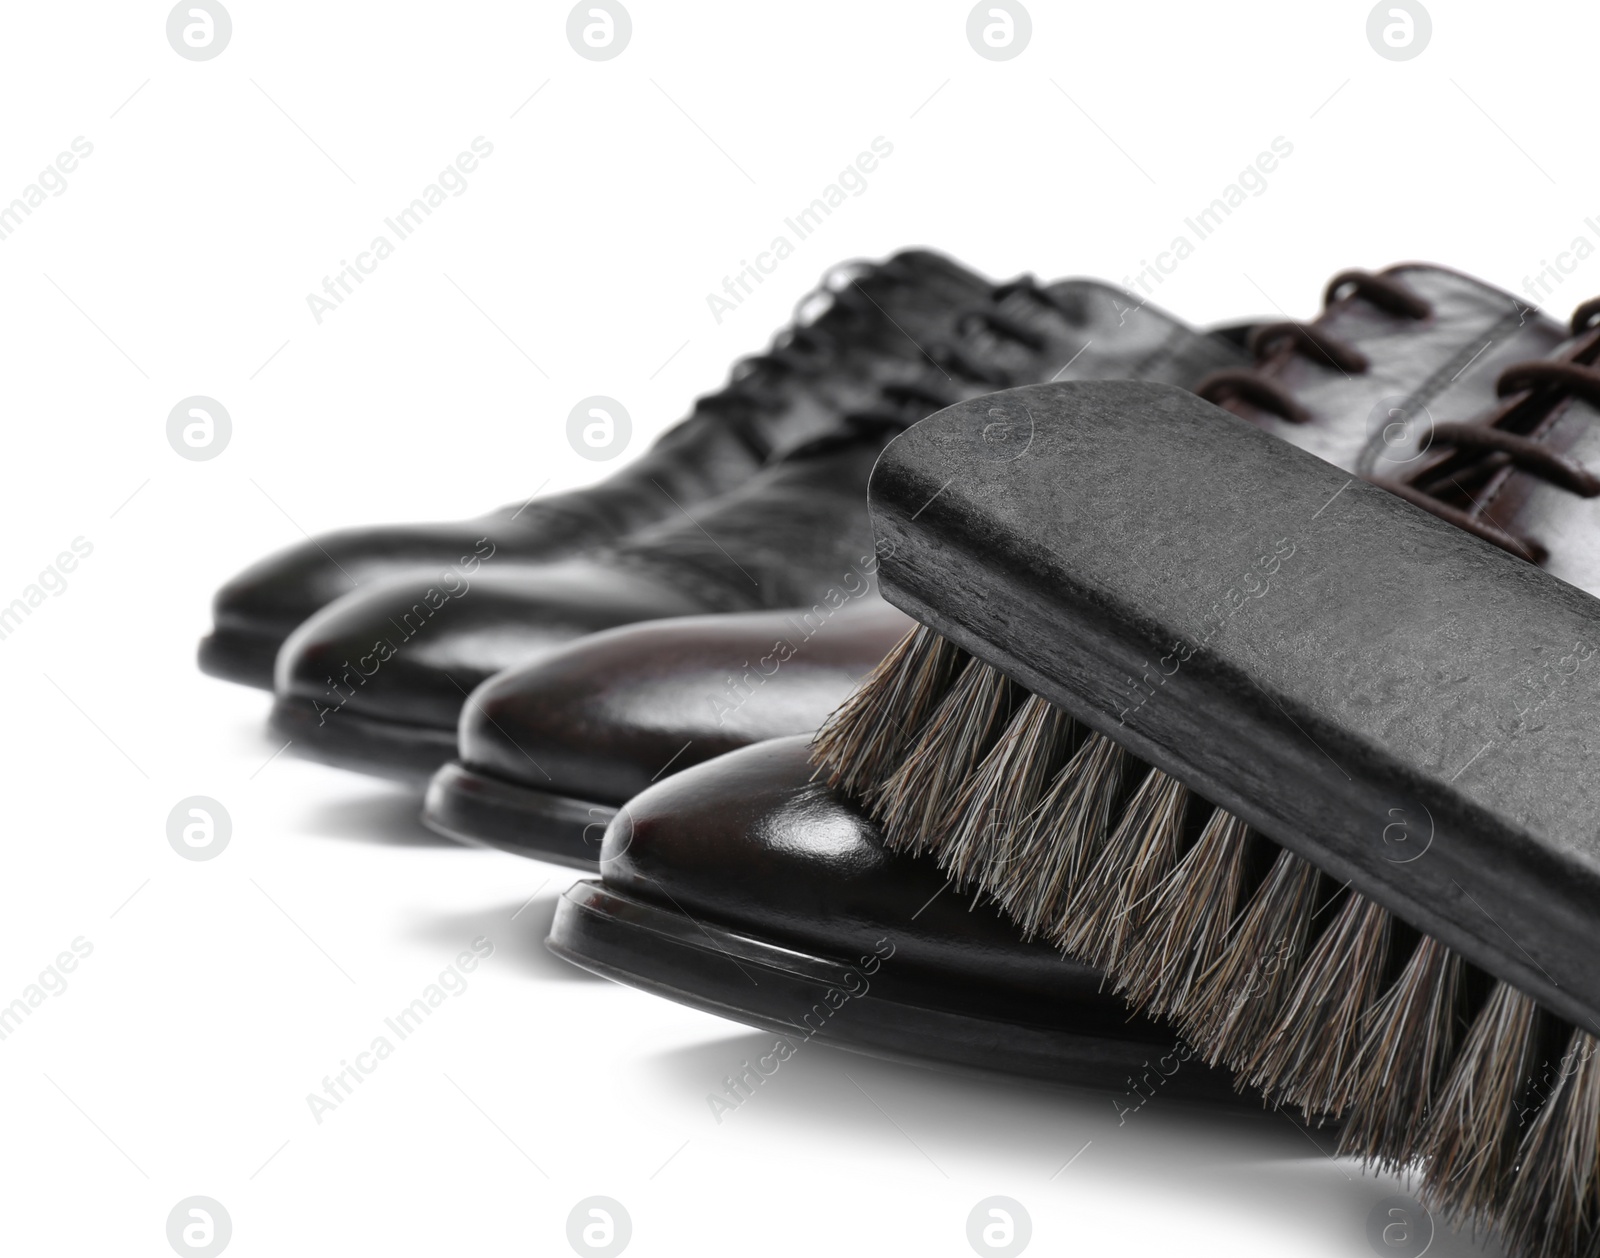 Photo of Stylish men's shoes and cleaning brush on white background, closeup